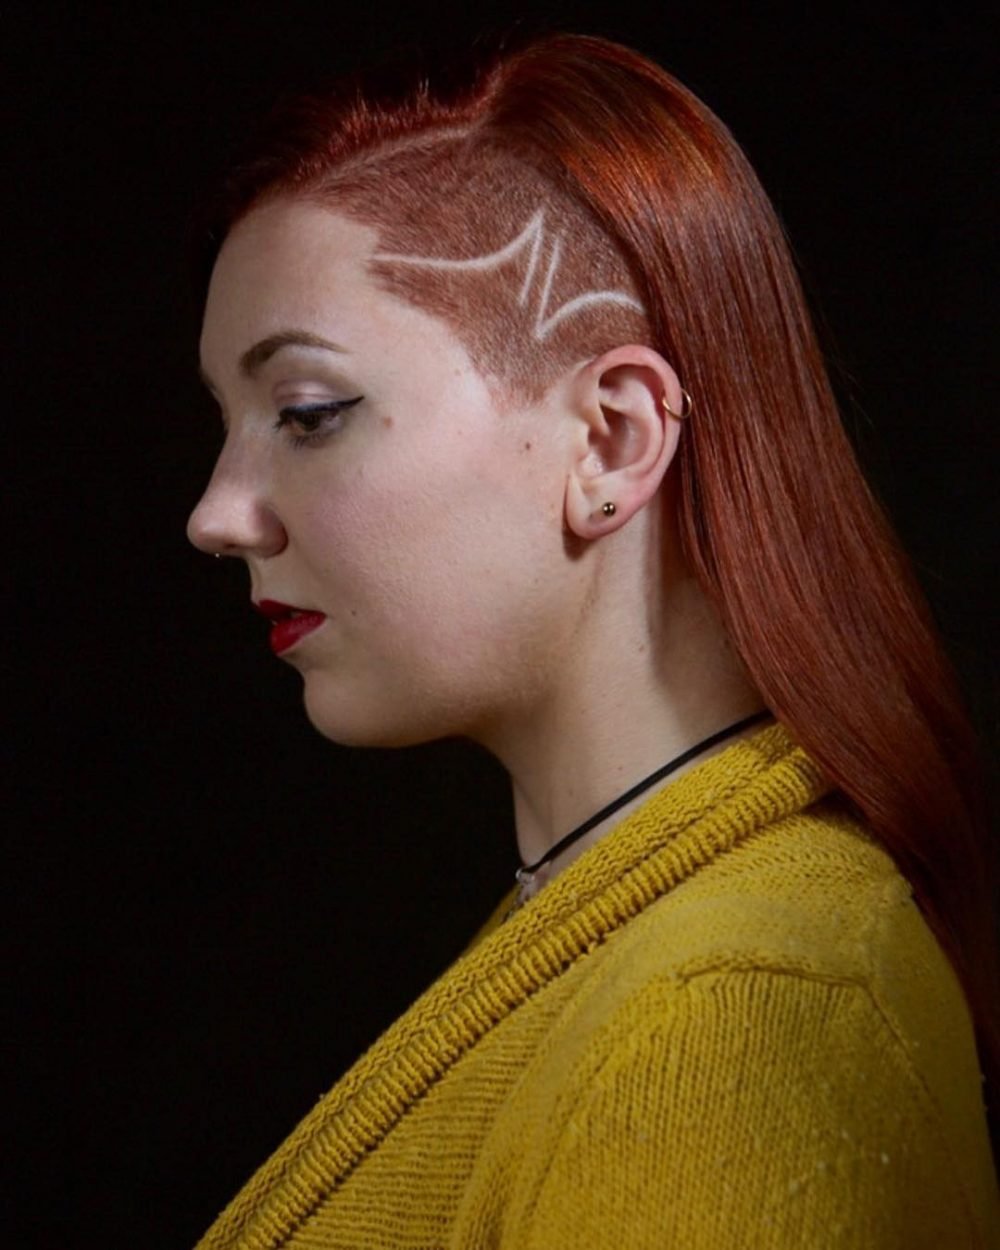 Stylish Simple Undercut Hairstyle on Red Copper Tone